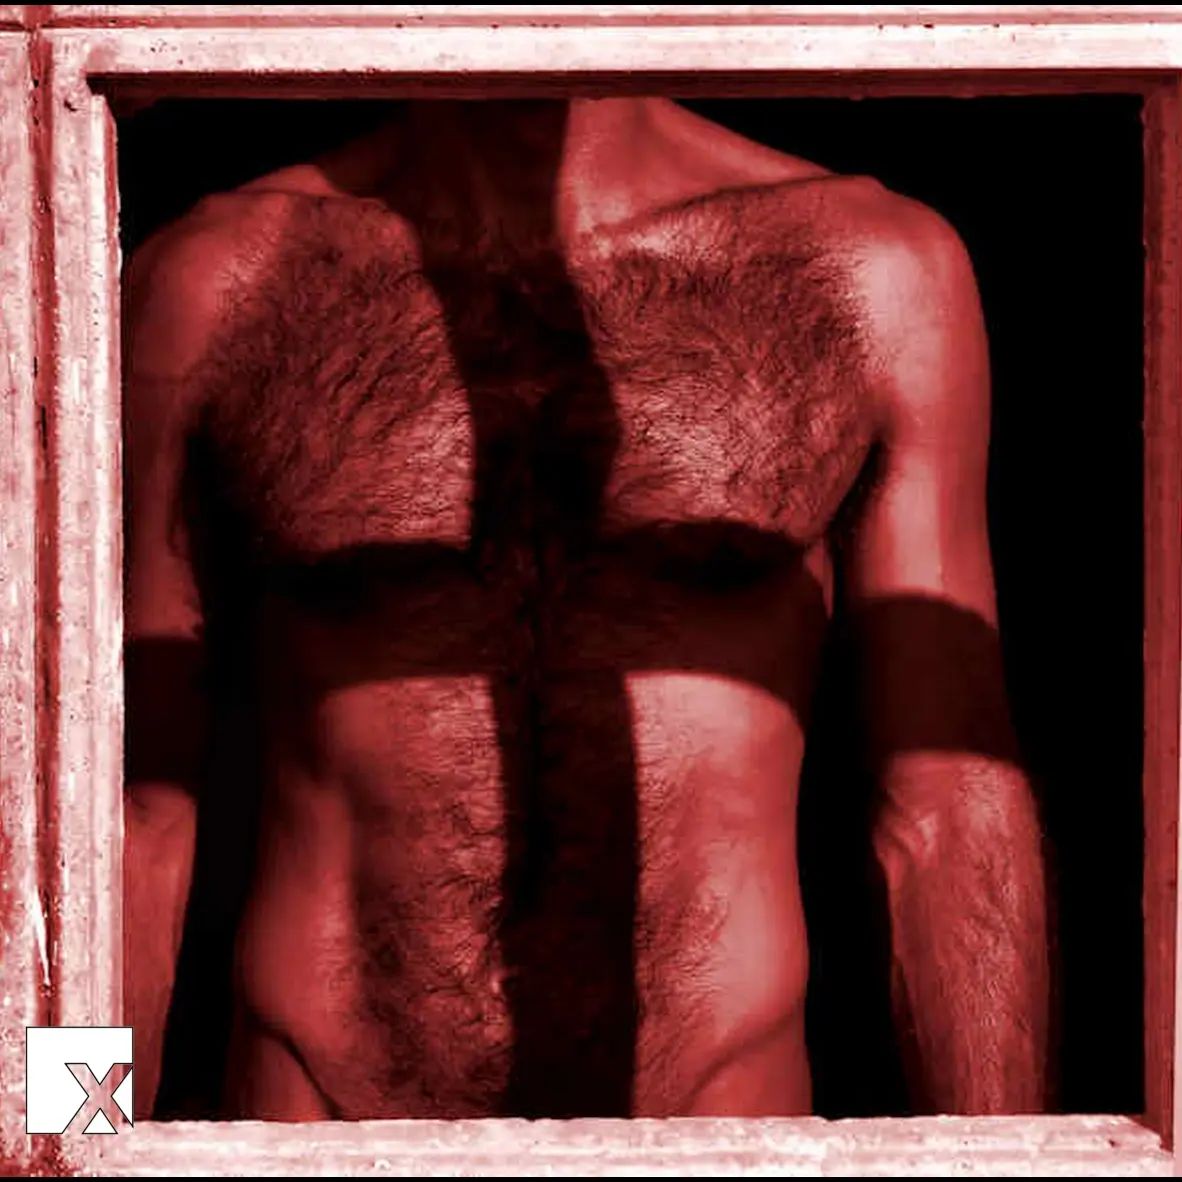 #red #hairy #photo # shootingday #chest #gym #muscle #gay #pose #xposed #homoerotic